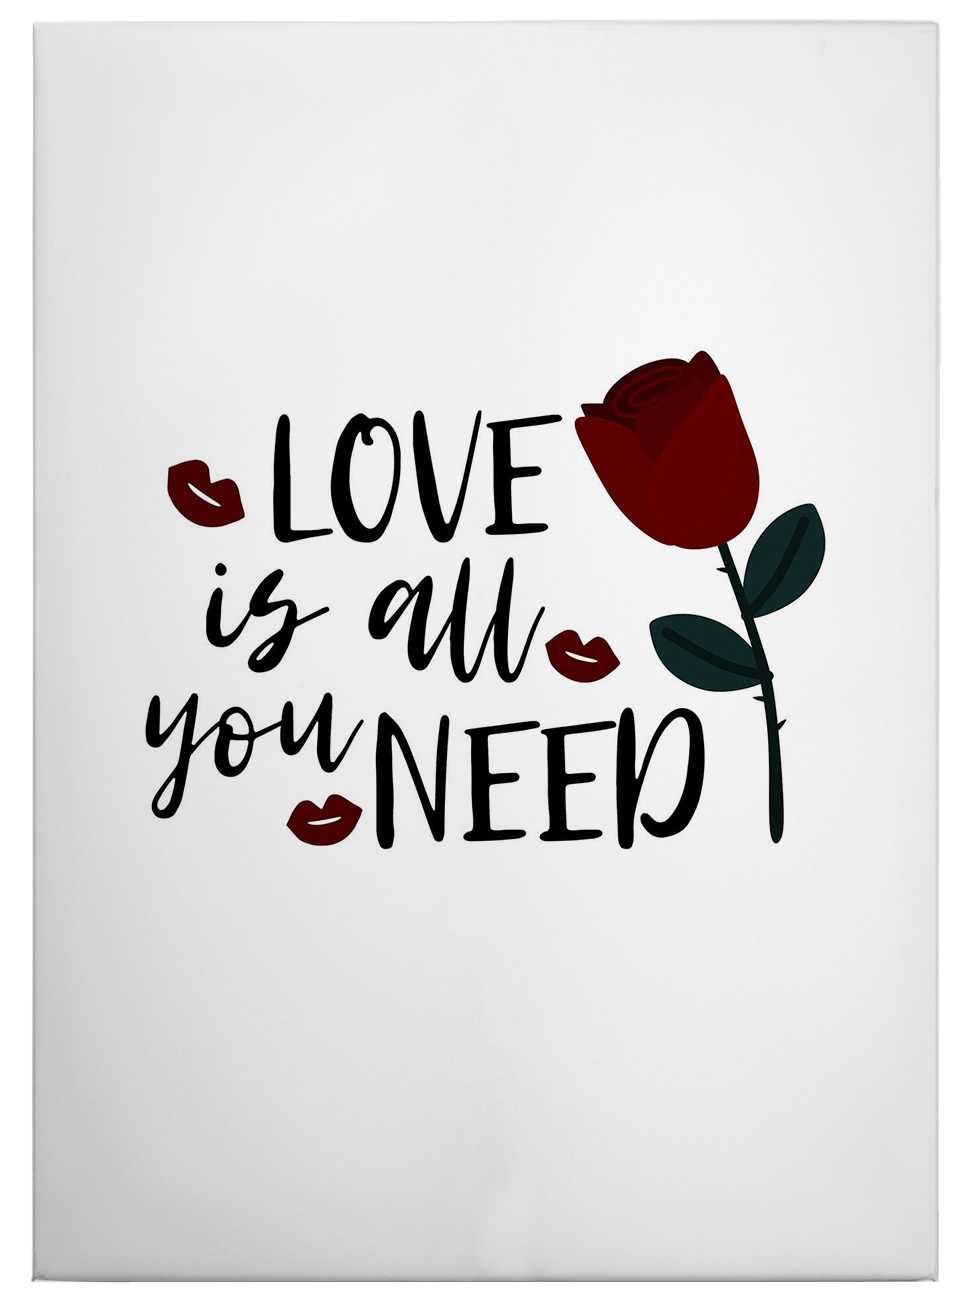             Tableau toile Proverbe love is all you need - 0,50 m x 0,70 m
        